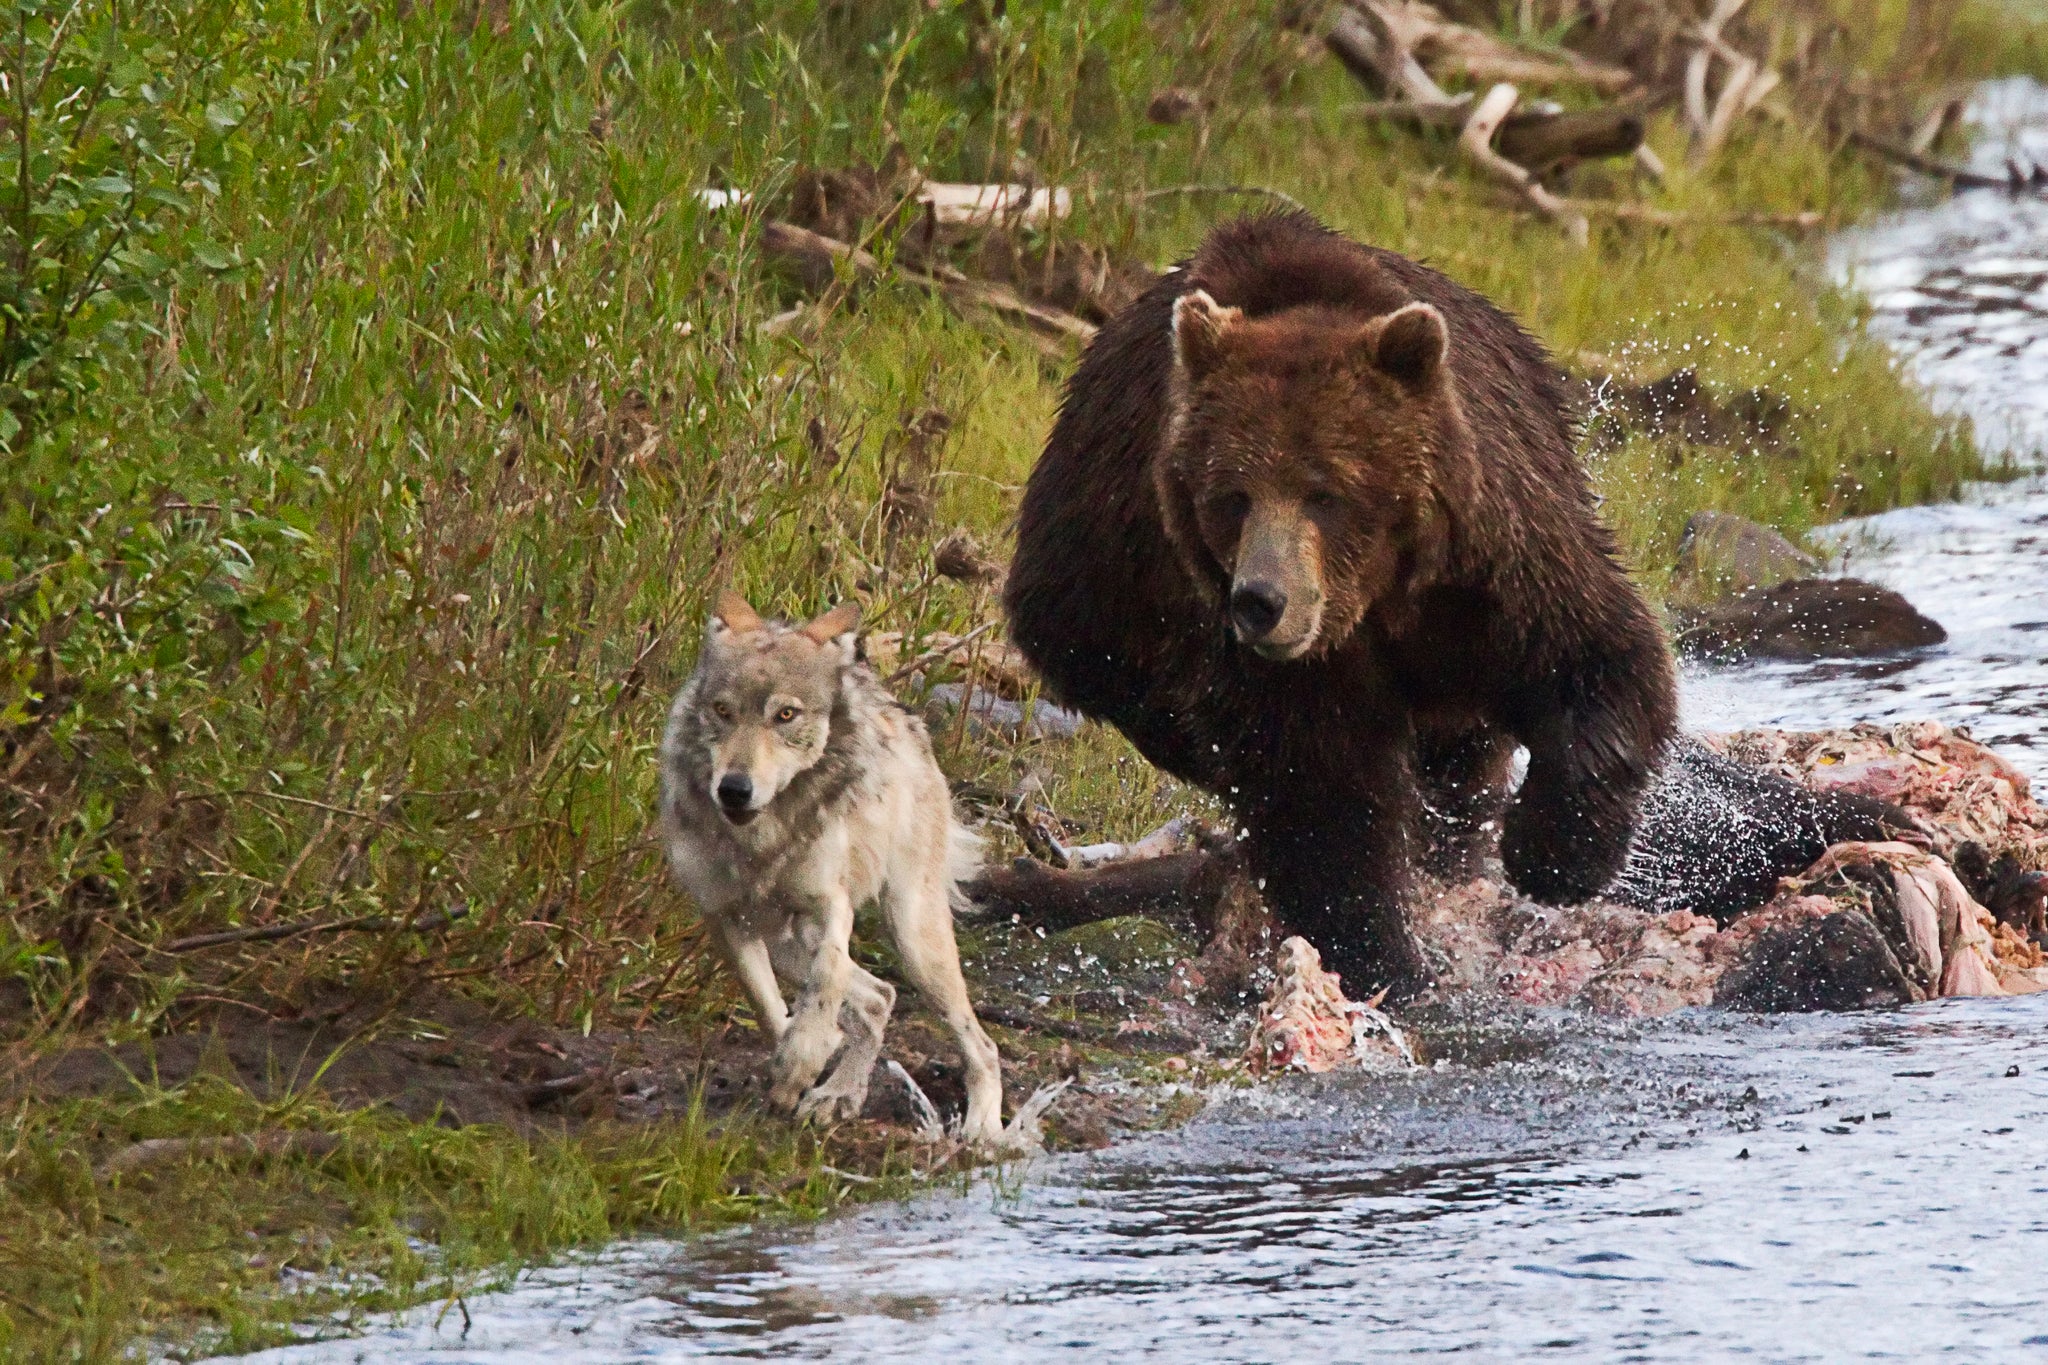 grizzly_bear_and_gray_wolf-5521_2048x.jpg